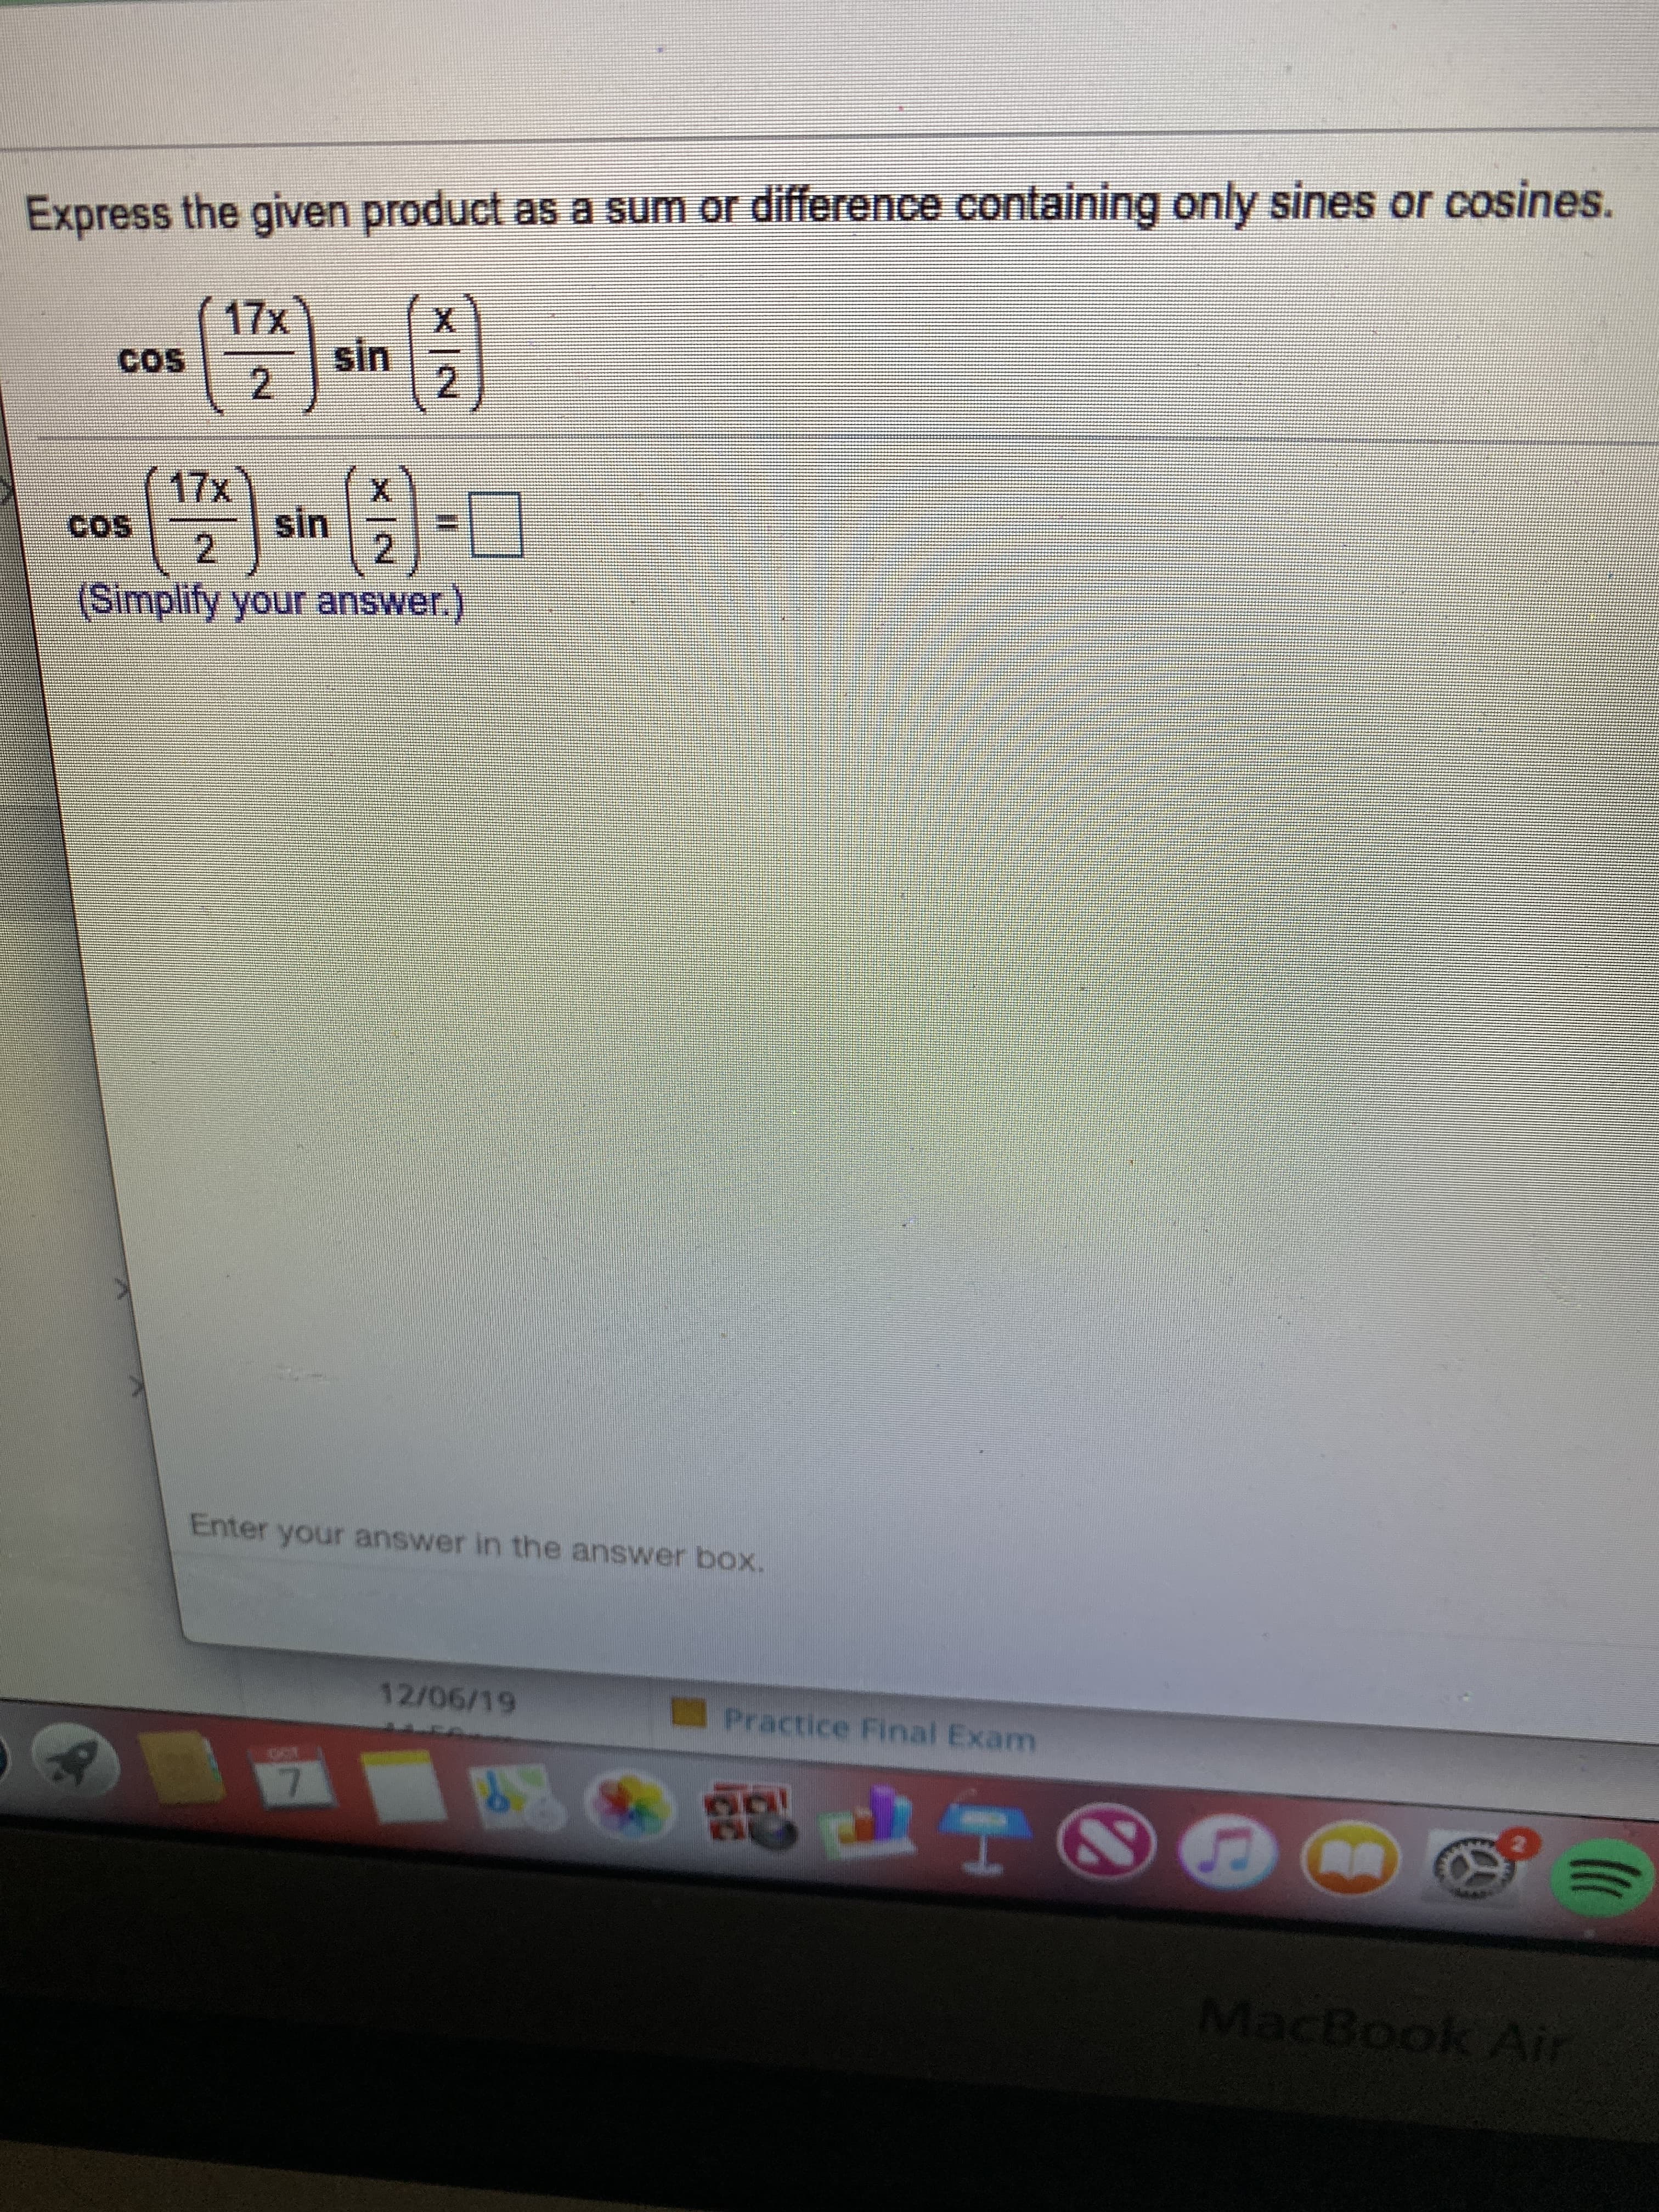 Express the given product as a sum or difference containing only sines or cosines.
17x
sin
COS
2
17x
Cos
X
sin
2
2
(Simplify your answer.)
Enter your answer in the answer box.
12/06/19
Practice Final Exam
MacBook Air
